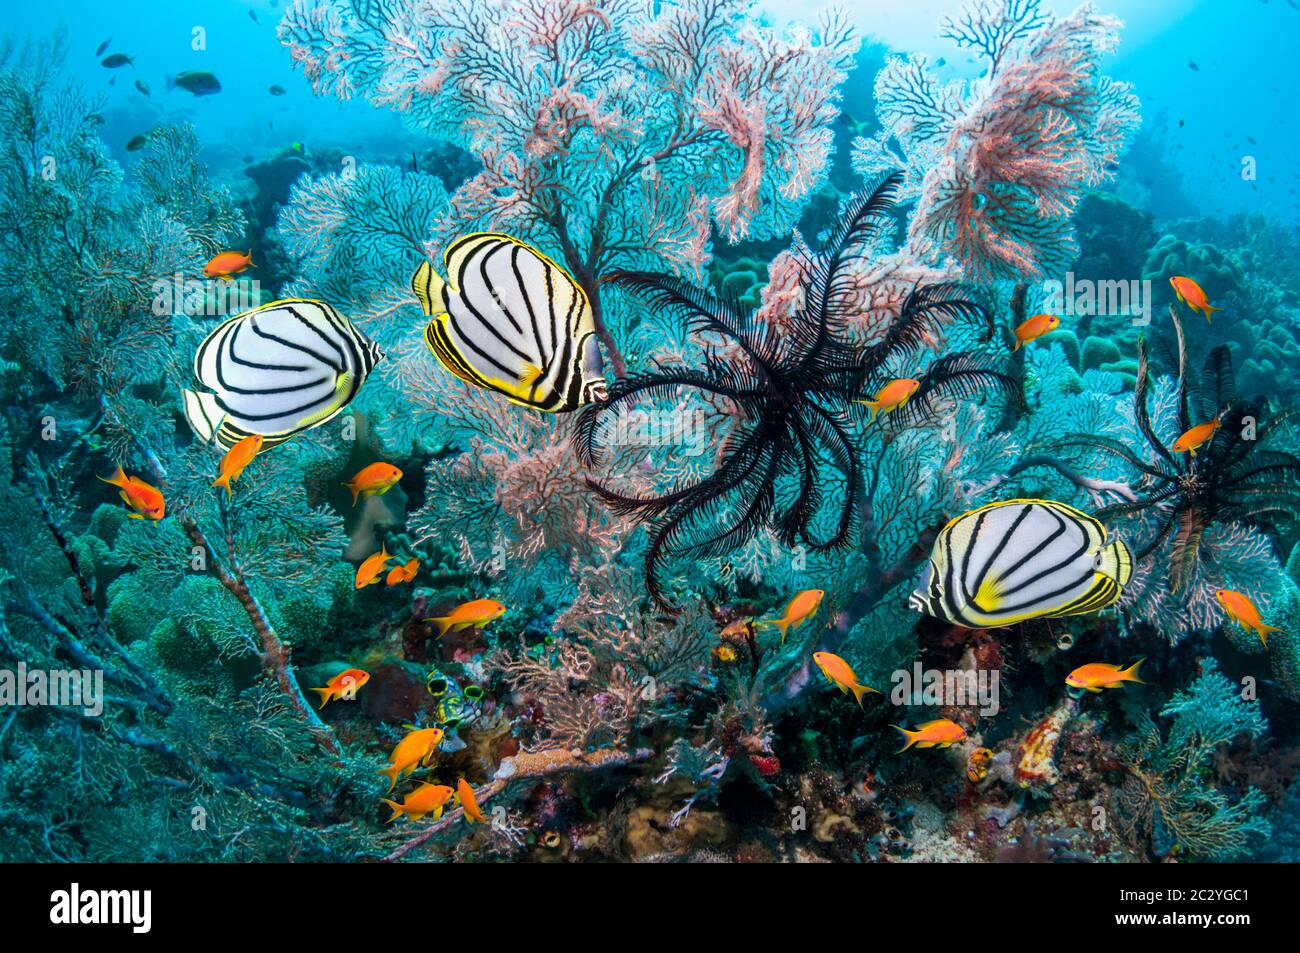 Meyer's butterflyfish [Chaetodon myeri] on coral reef with gorgonians, featherstars and Goldies.  Raja Ampat, West Papua, Indonesia. Stock Photo